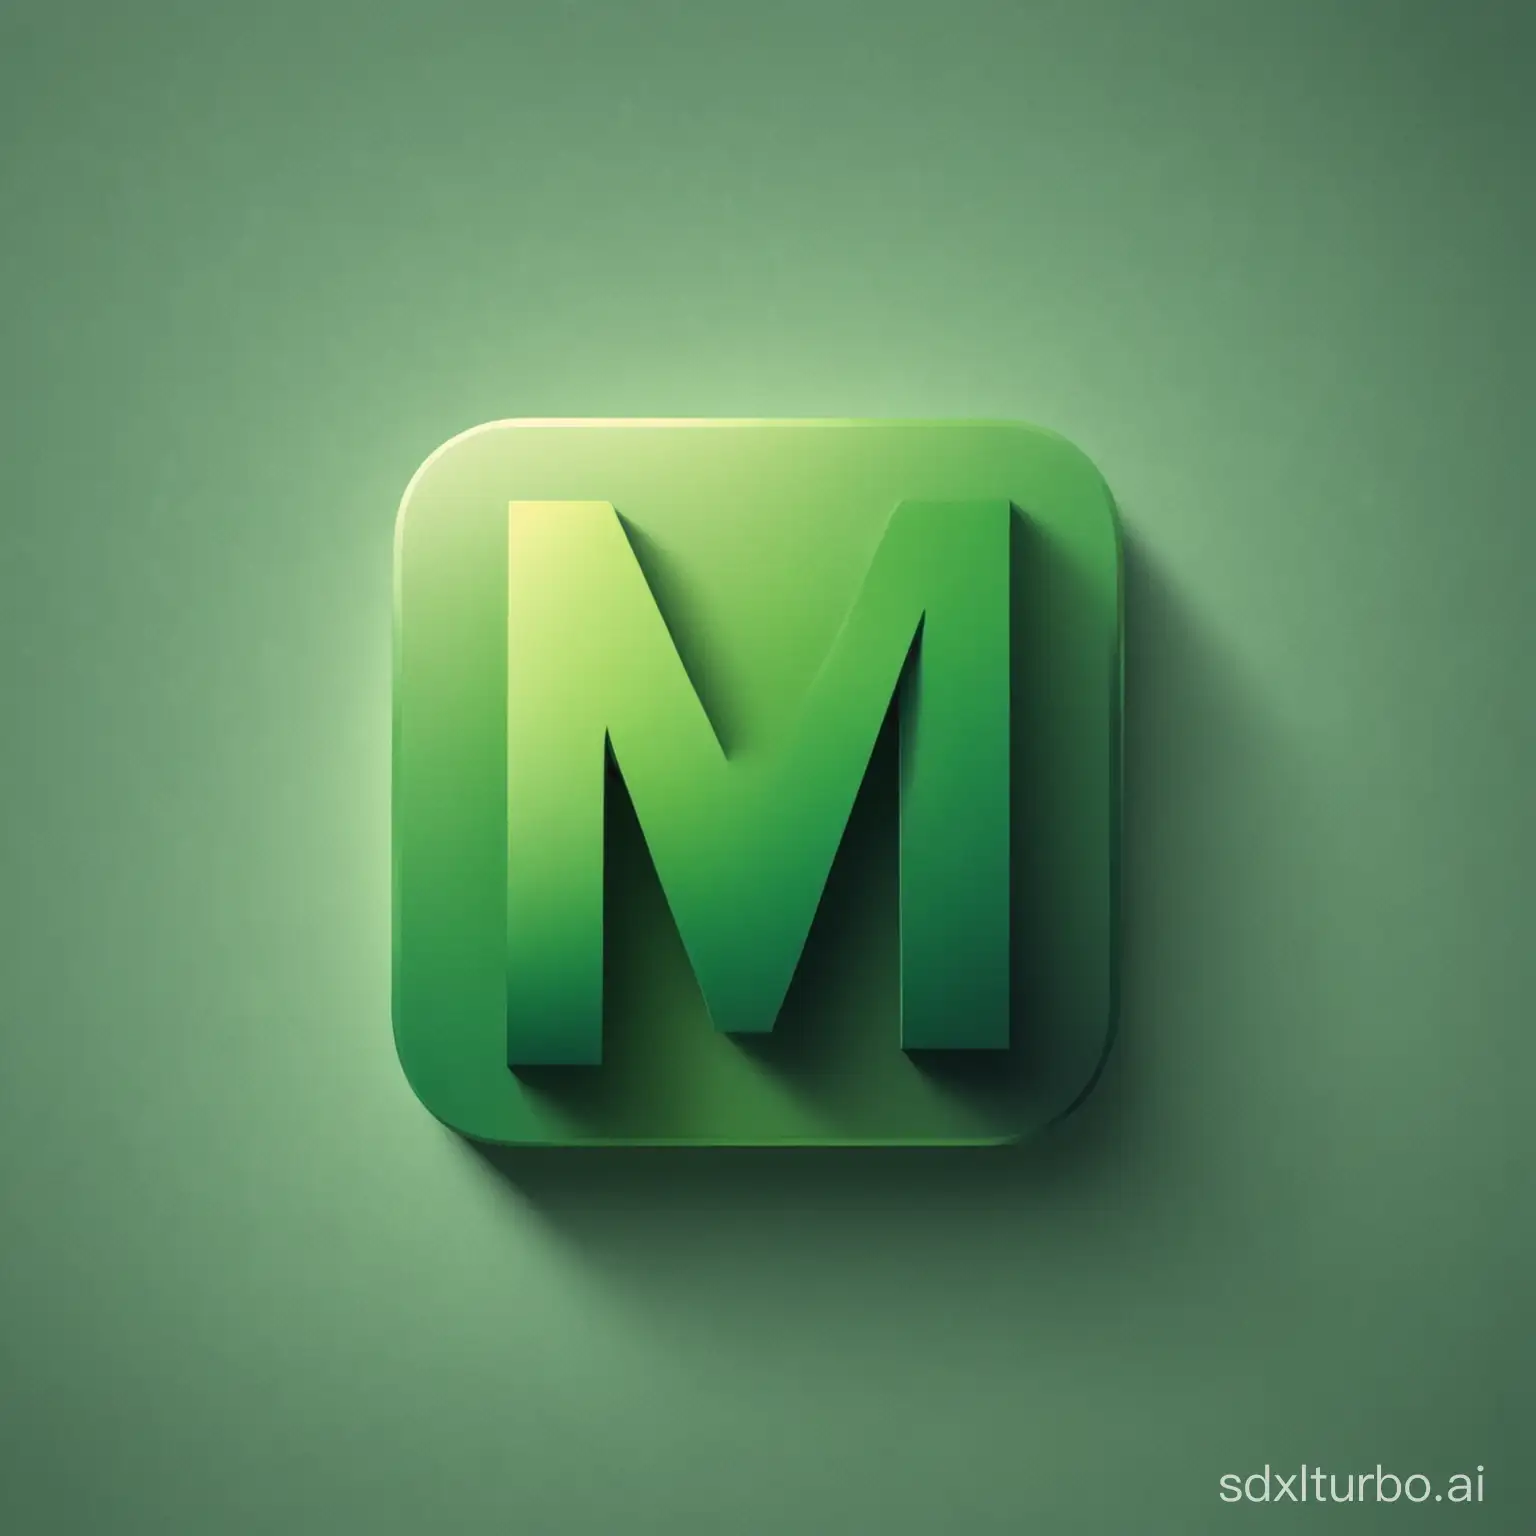 Modern-Flat-MLetter-Logo-with-Green-Shading-and-Rounded-Corners